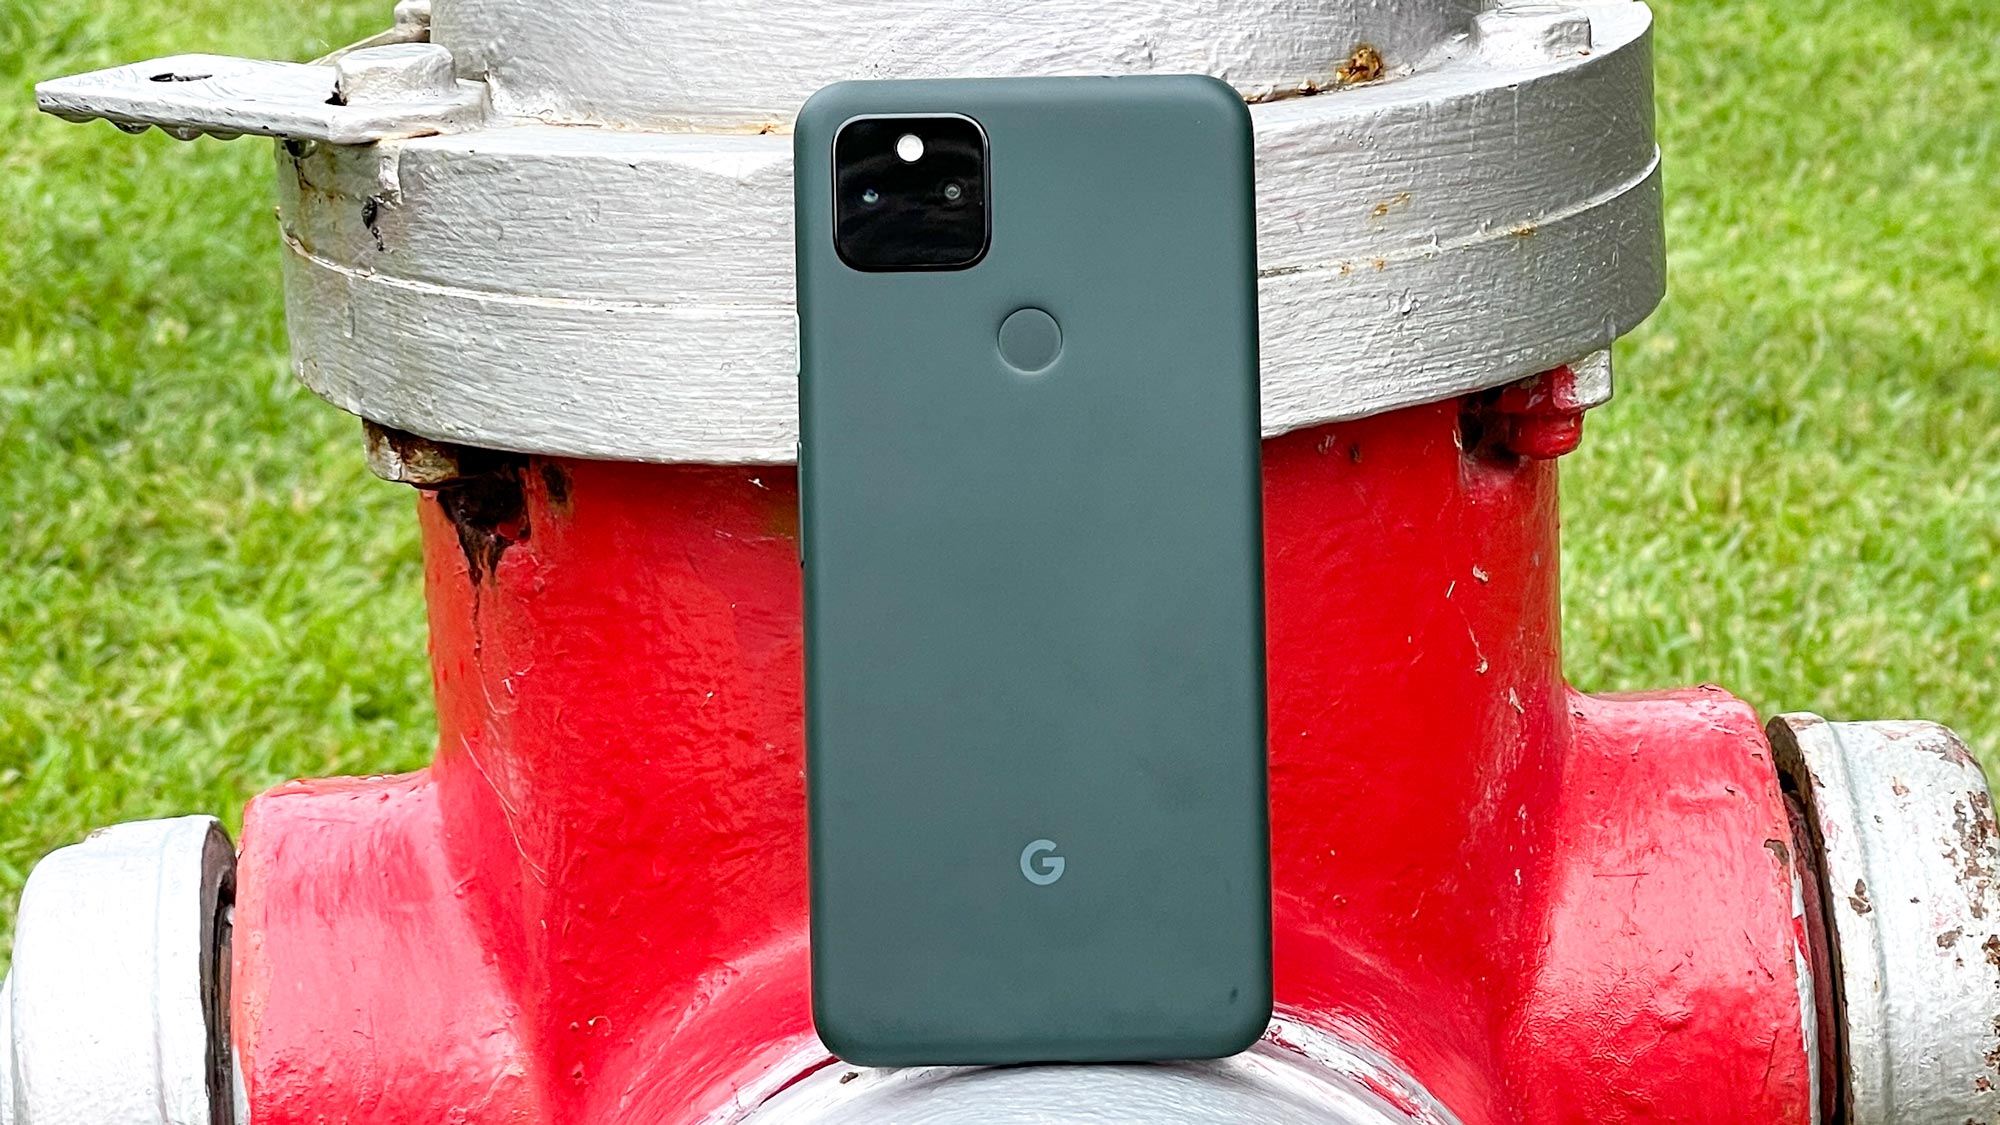 Google Pixel 5a resting on a metal tube